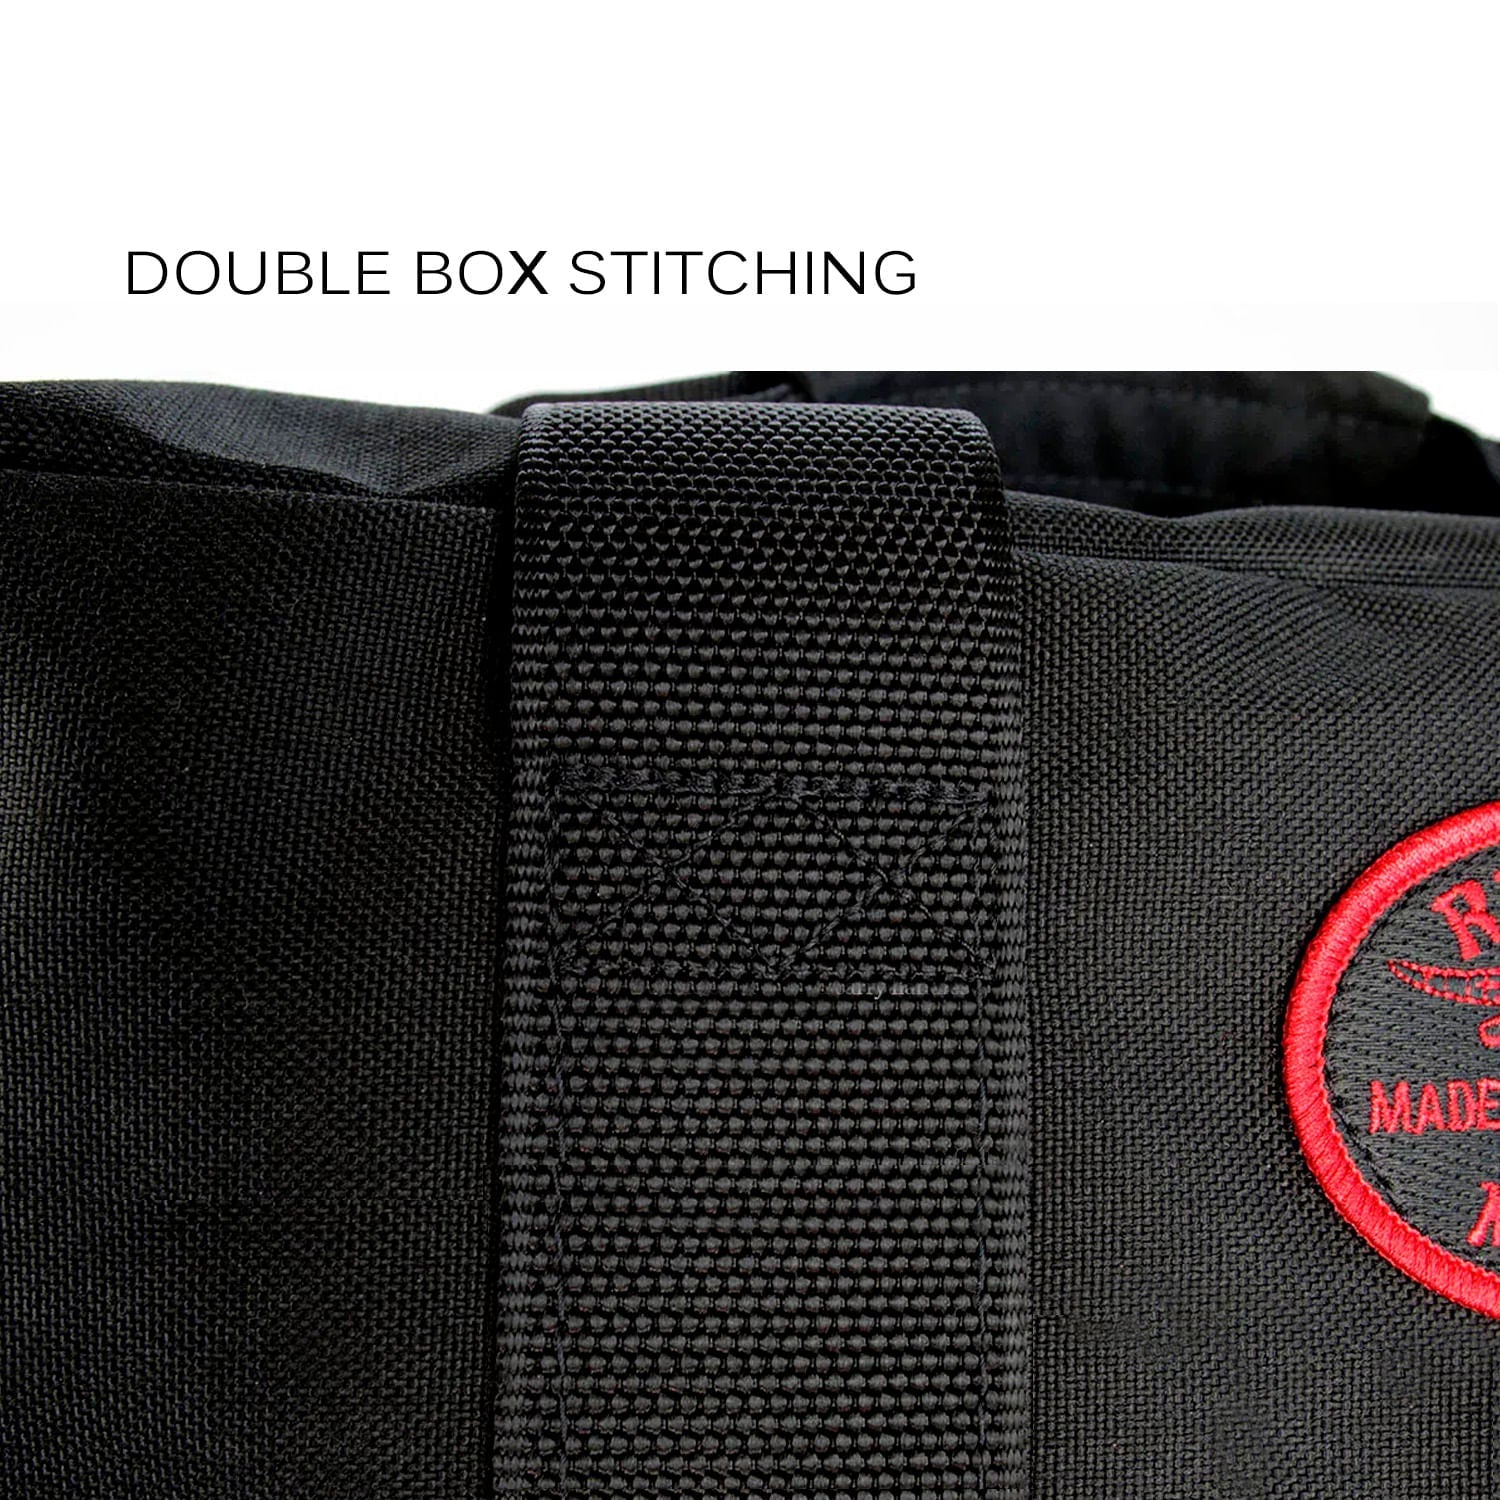 Double box X stitching for durability and strength, 